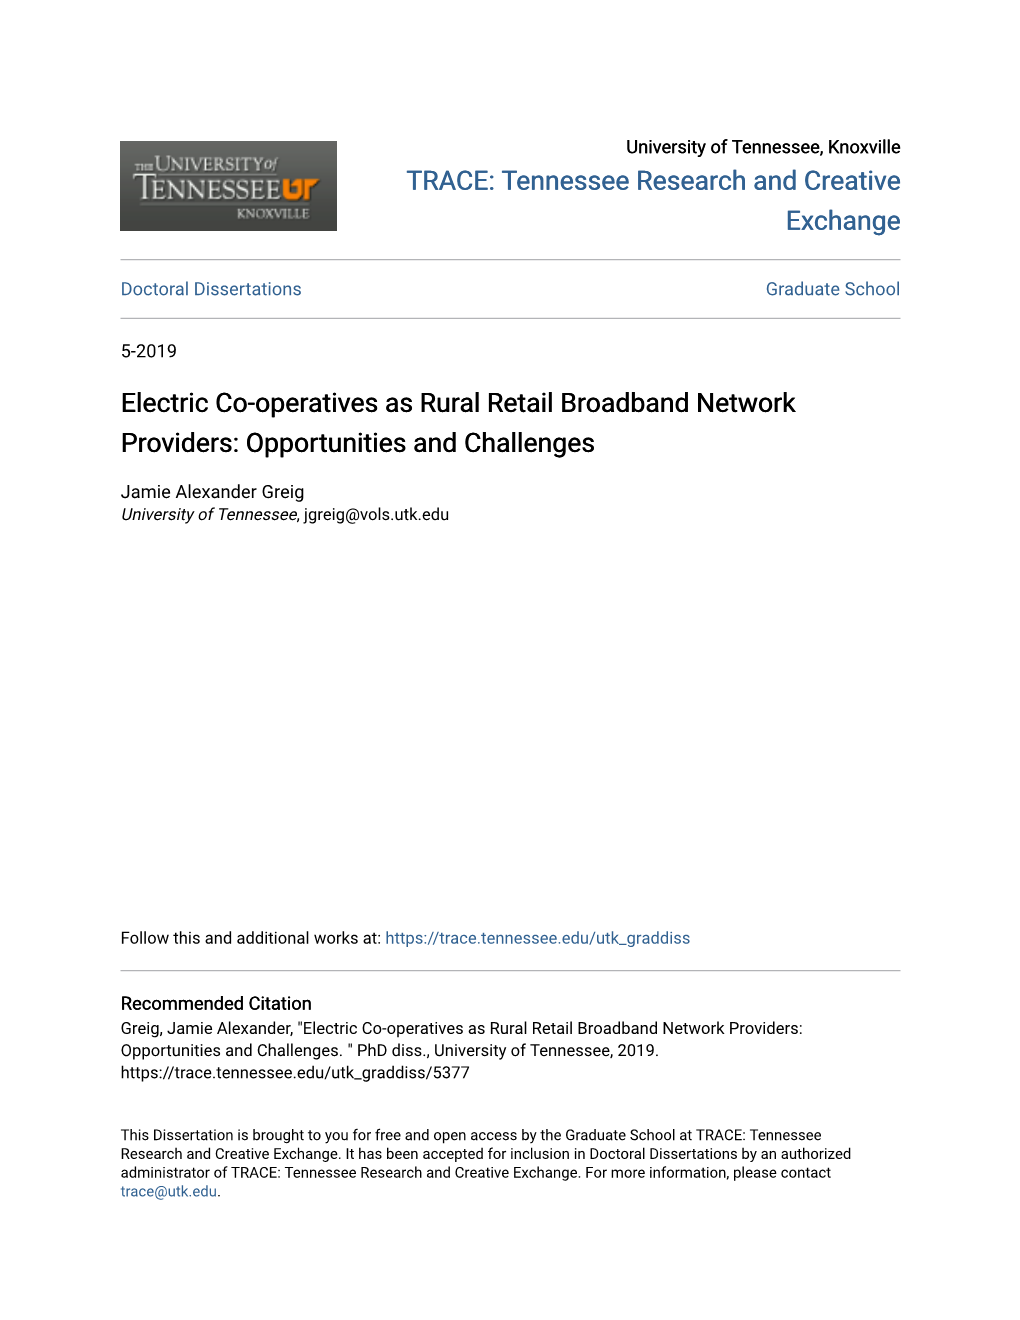 Electric Co-Operatives As Rural Retail Broadband Network Providers: Opportunities and Challenges